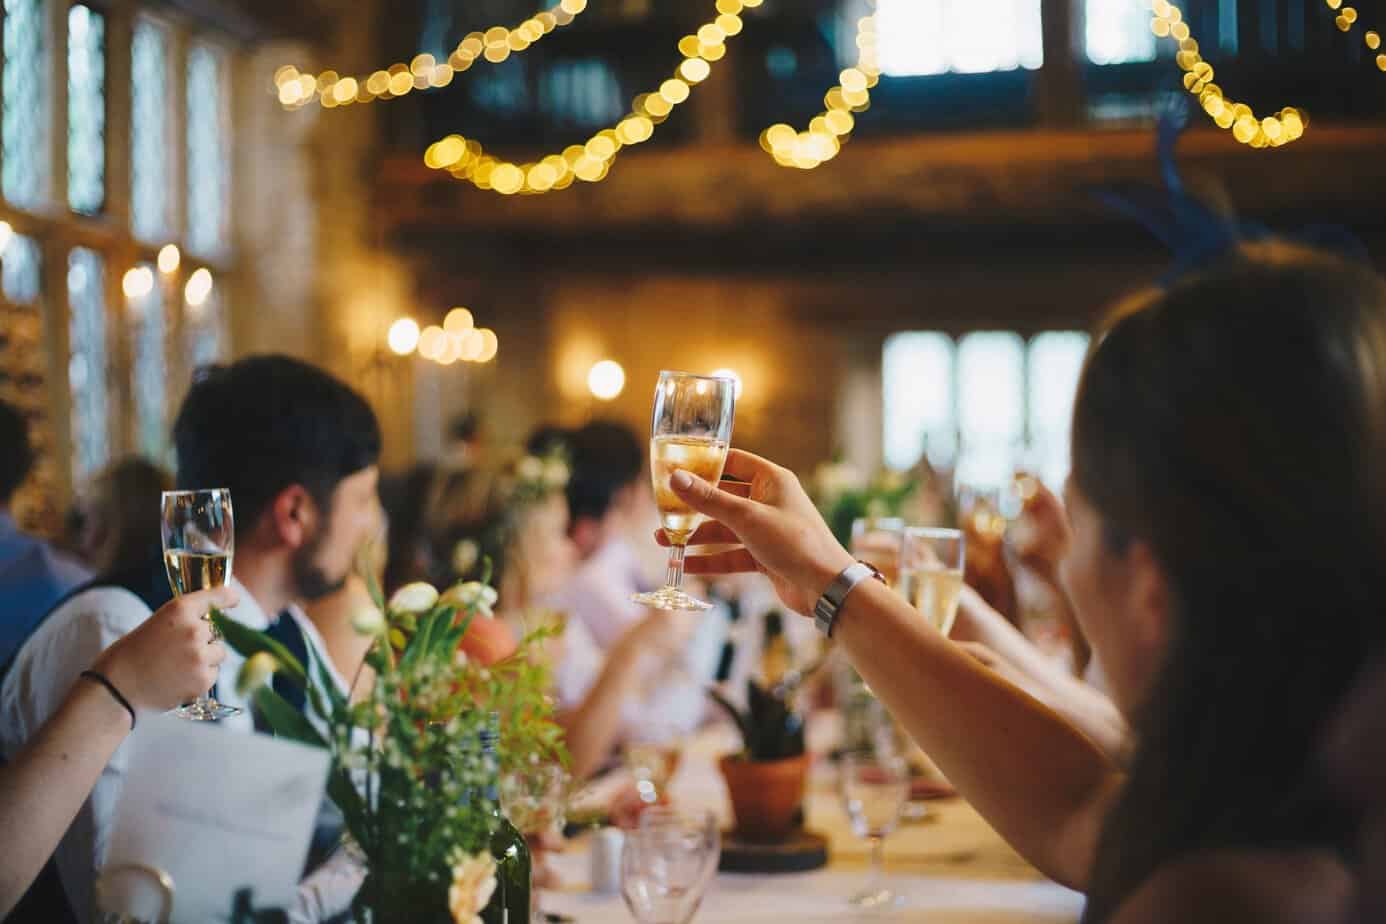 Guests cheering at a wedding with bubbly